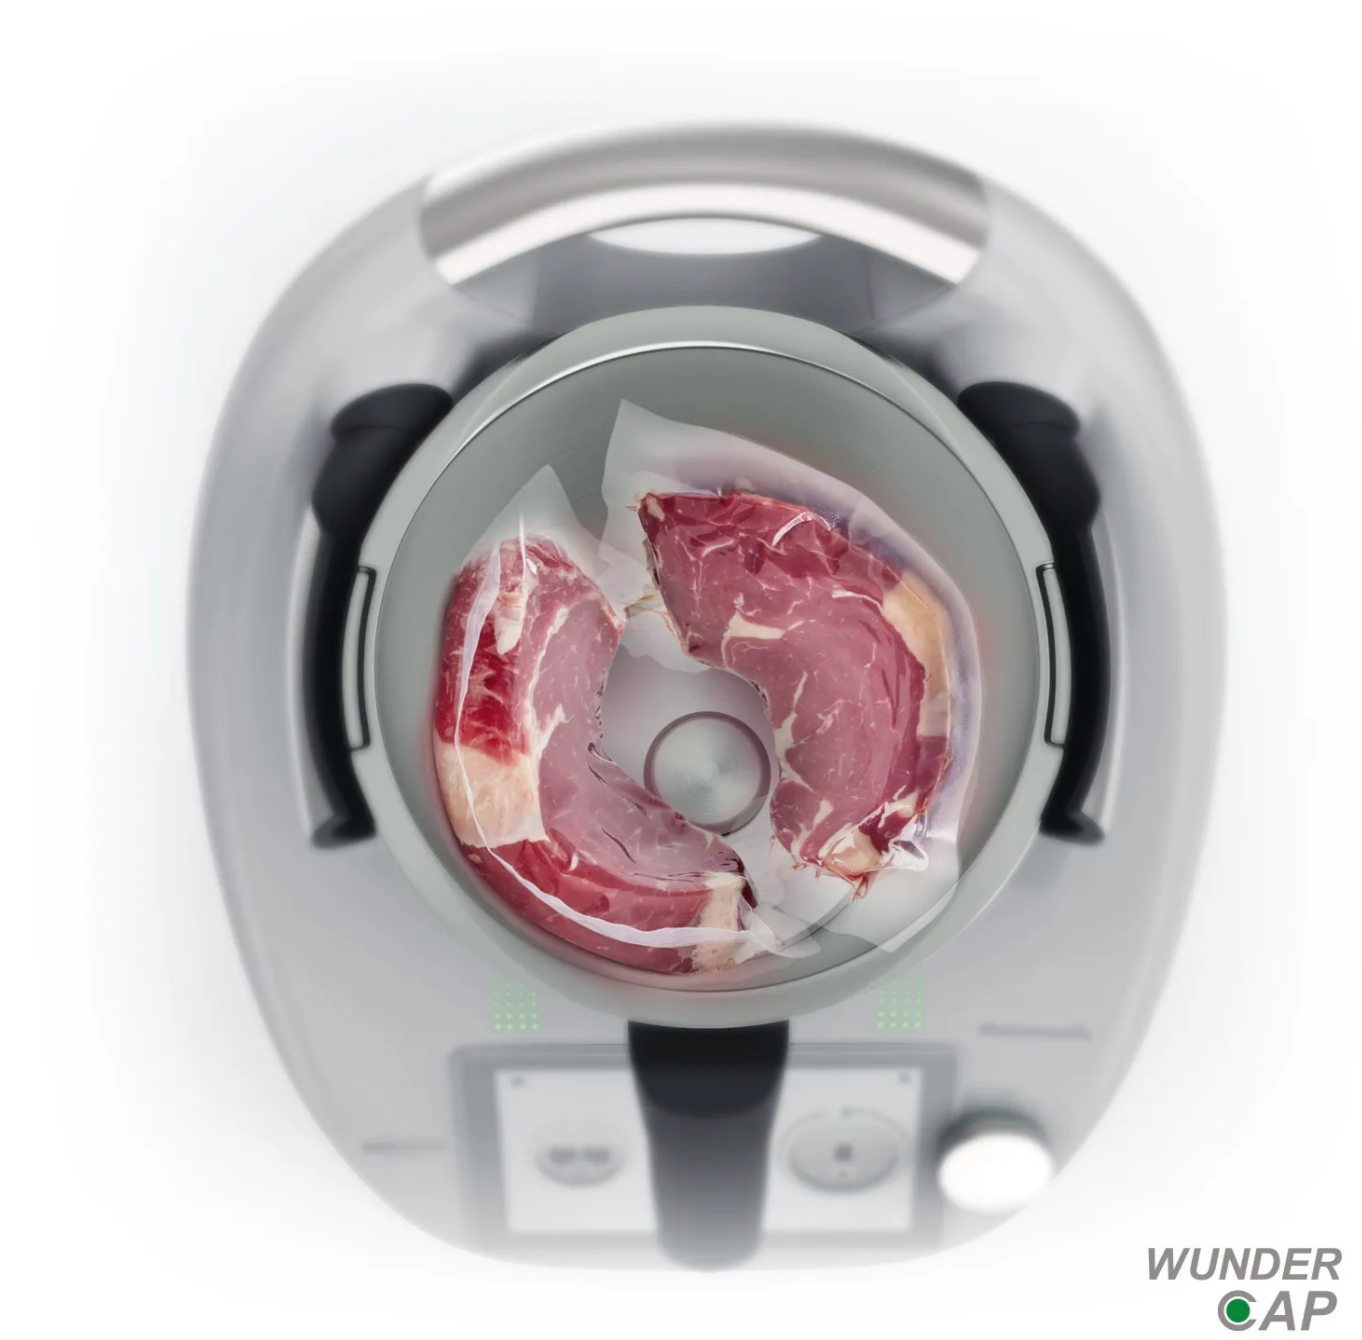 WunderCap®, The revolutionary Thermomix® Blade cover alternative